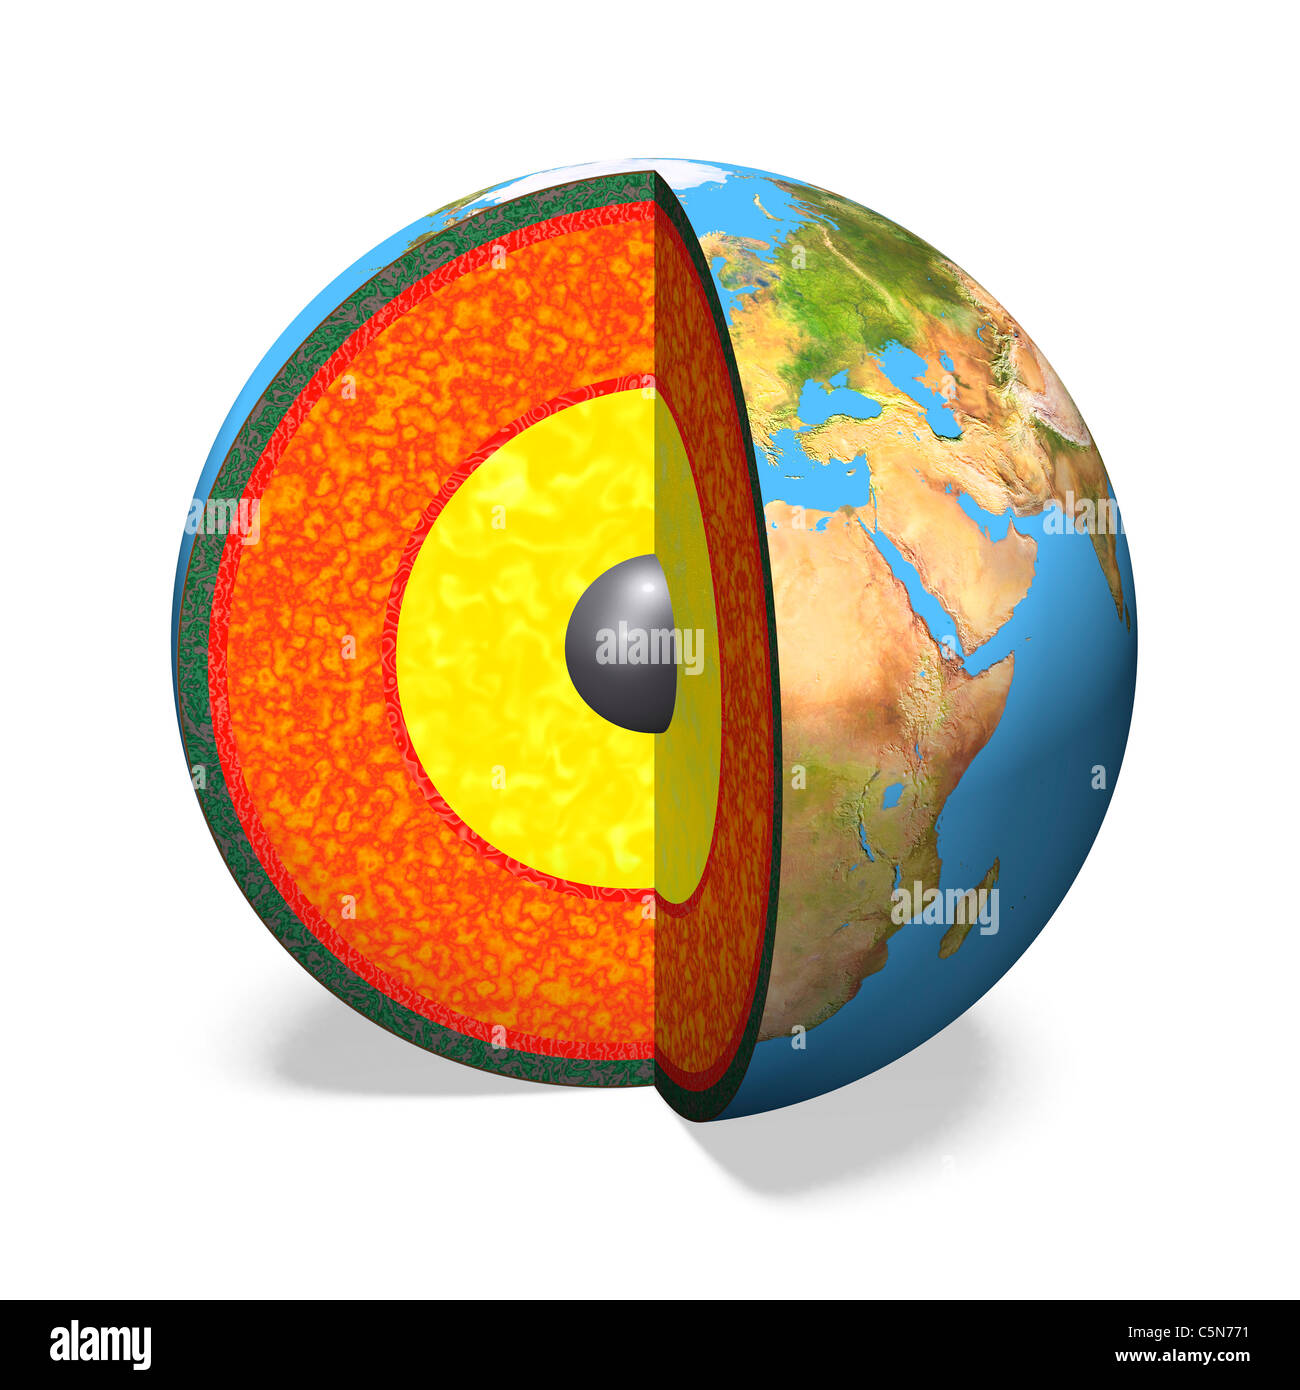 Inner structure of the Earth. Stock Photo